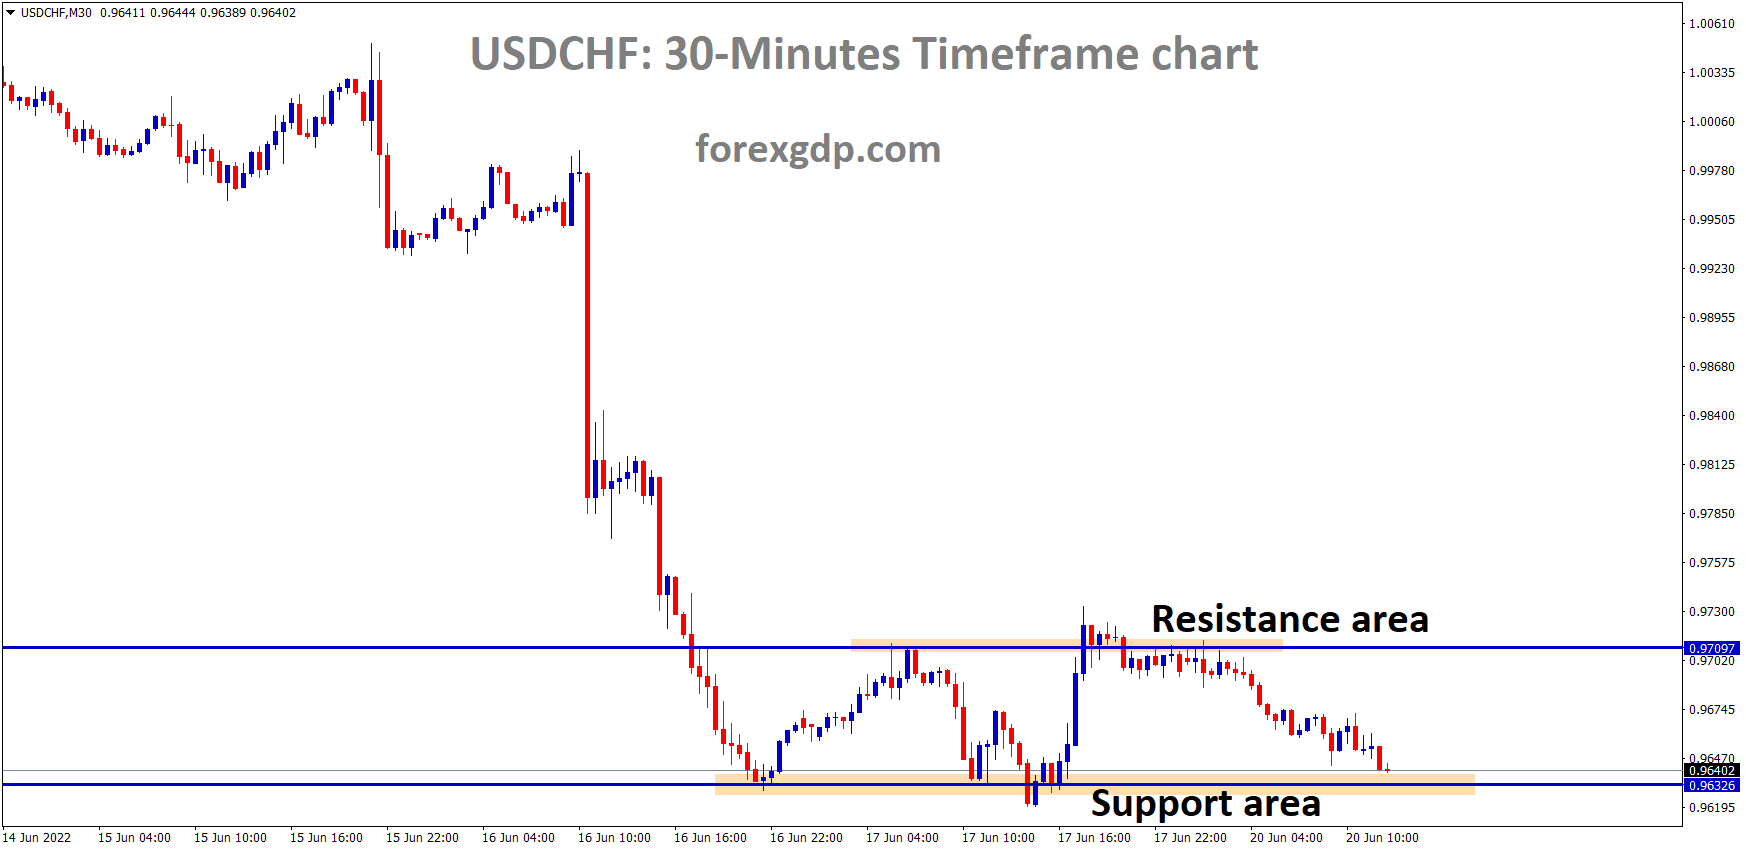 USDCHF is moving in the Box Pattern and the market has reached the Horizontal support area of the Pattern.